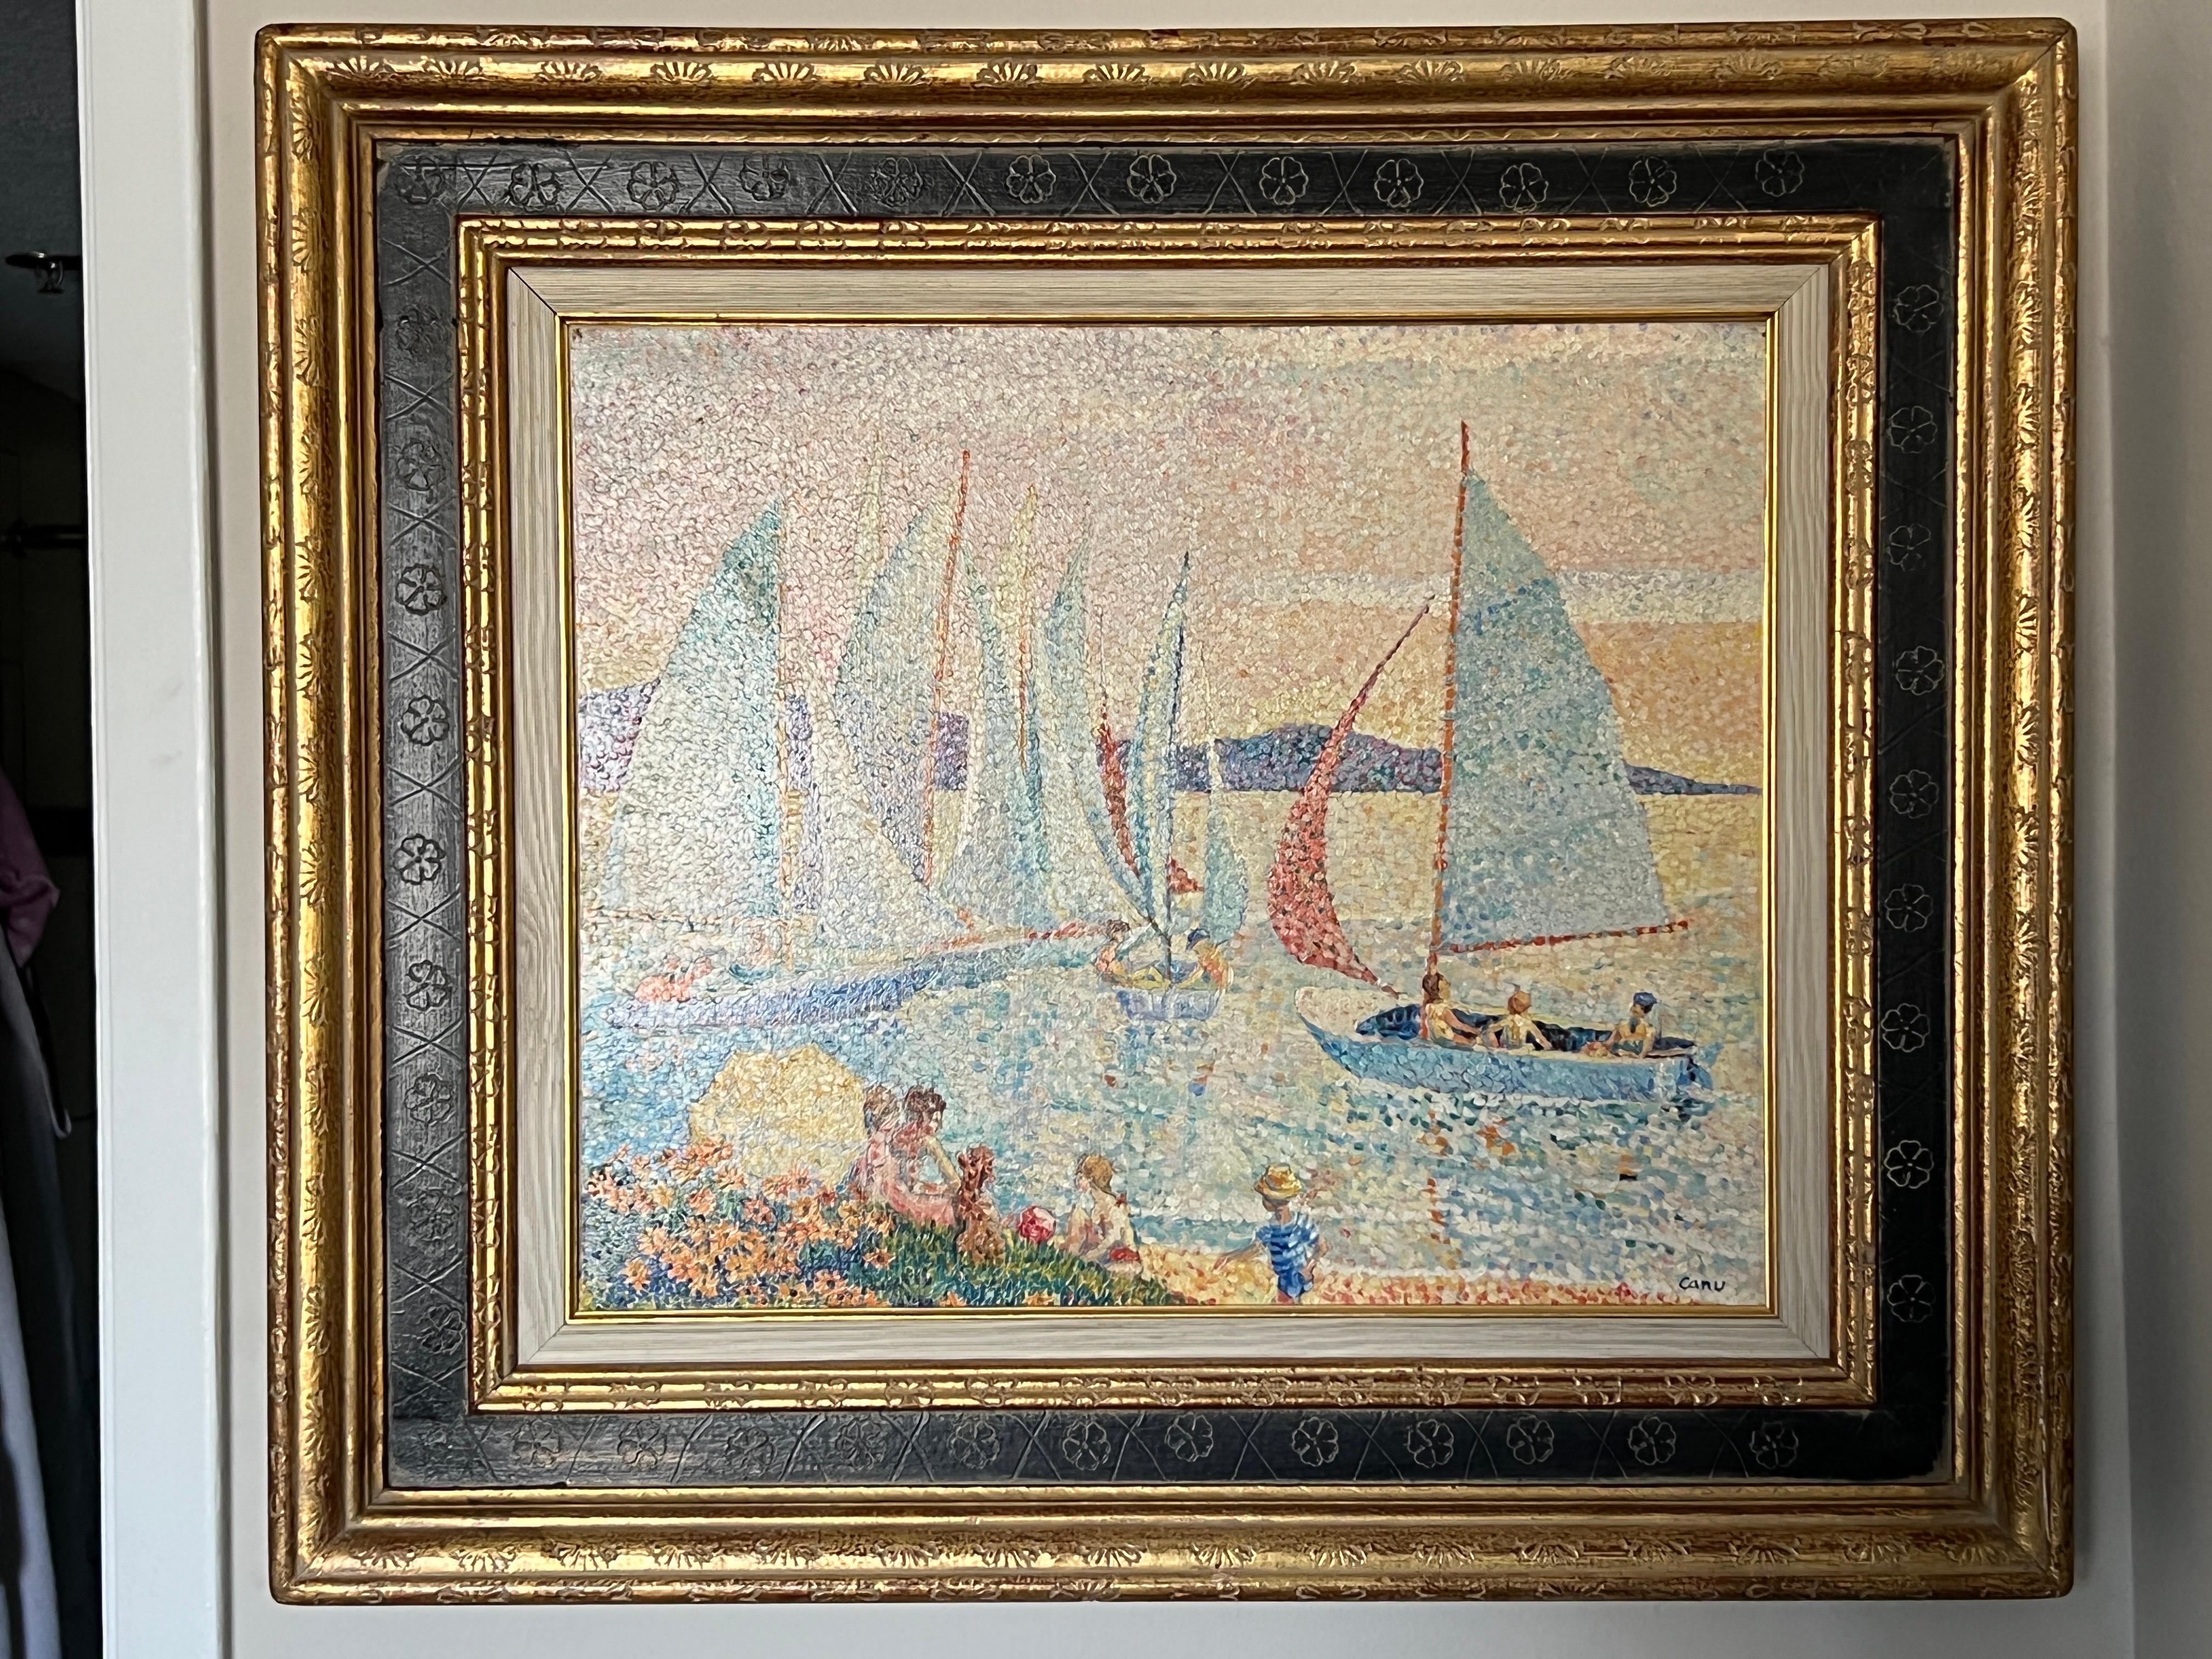 Yvonne Canu (French, 1921-2008), “Les Regates”. A fine French Pointillist oil on canvas painting of sailboats in the harbor. The scene also includes a family playing in the foreground. 
Signed to the lower right “Canu”. The verso includes title and